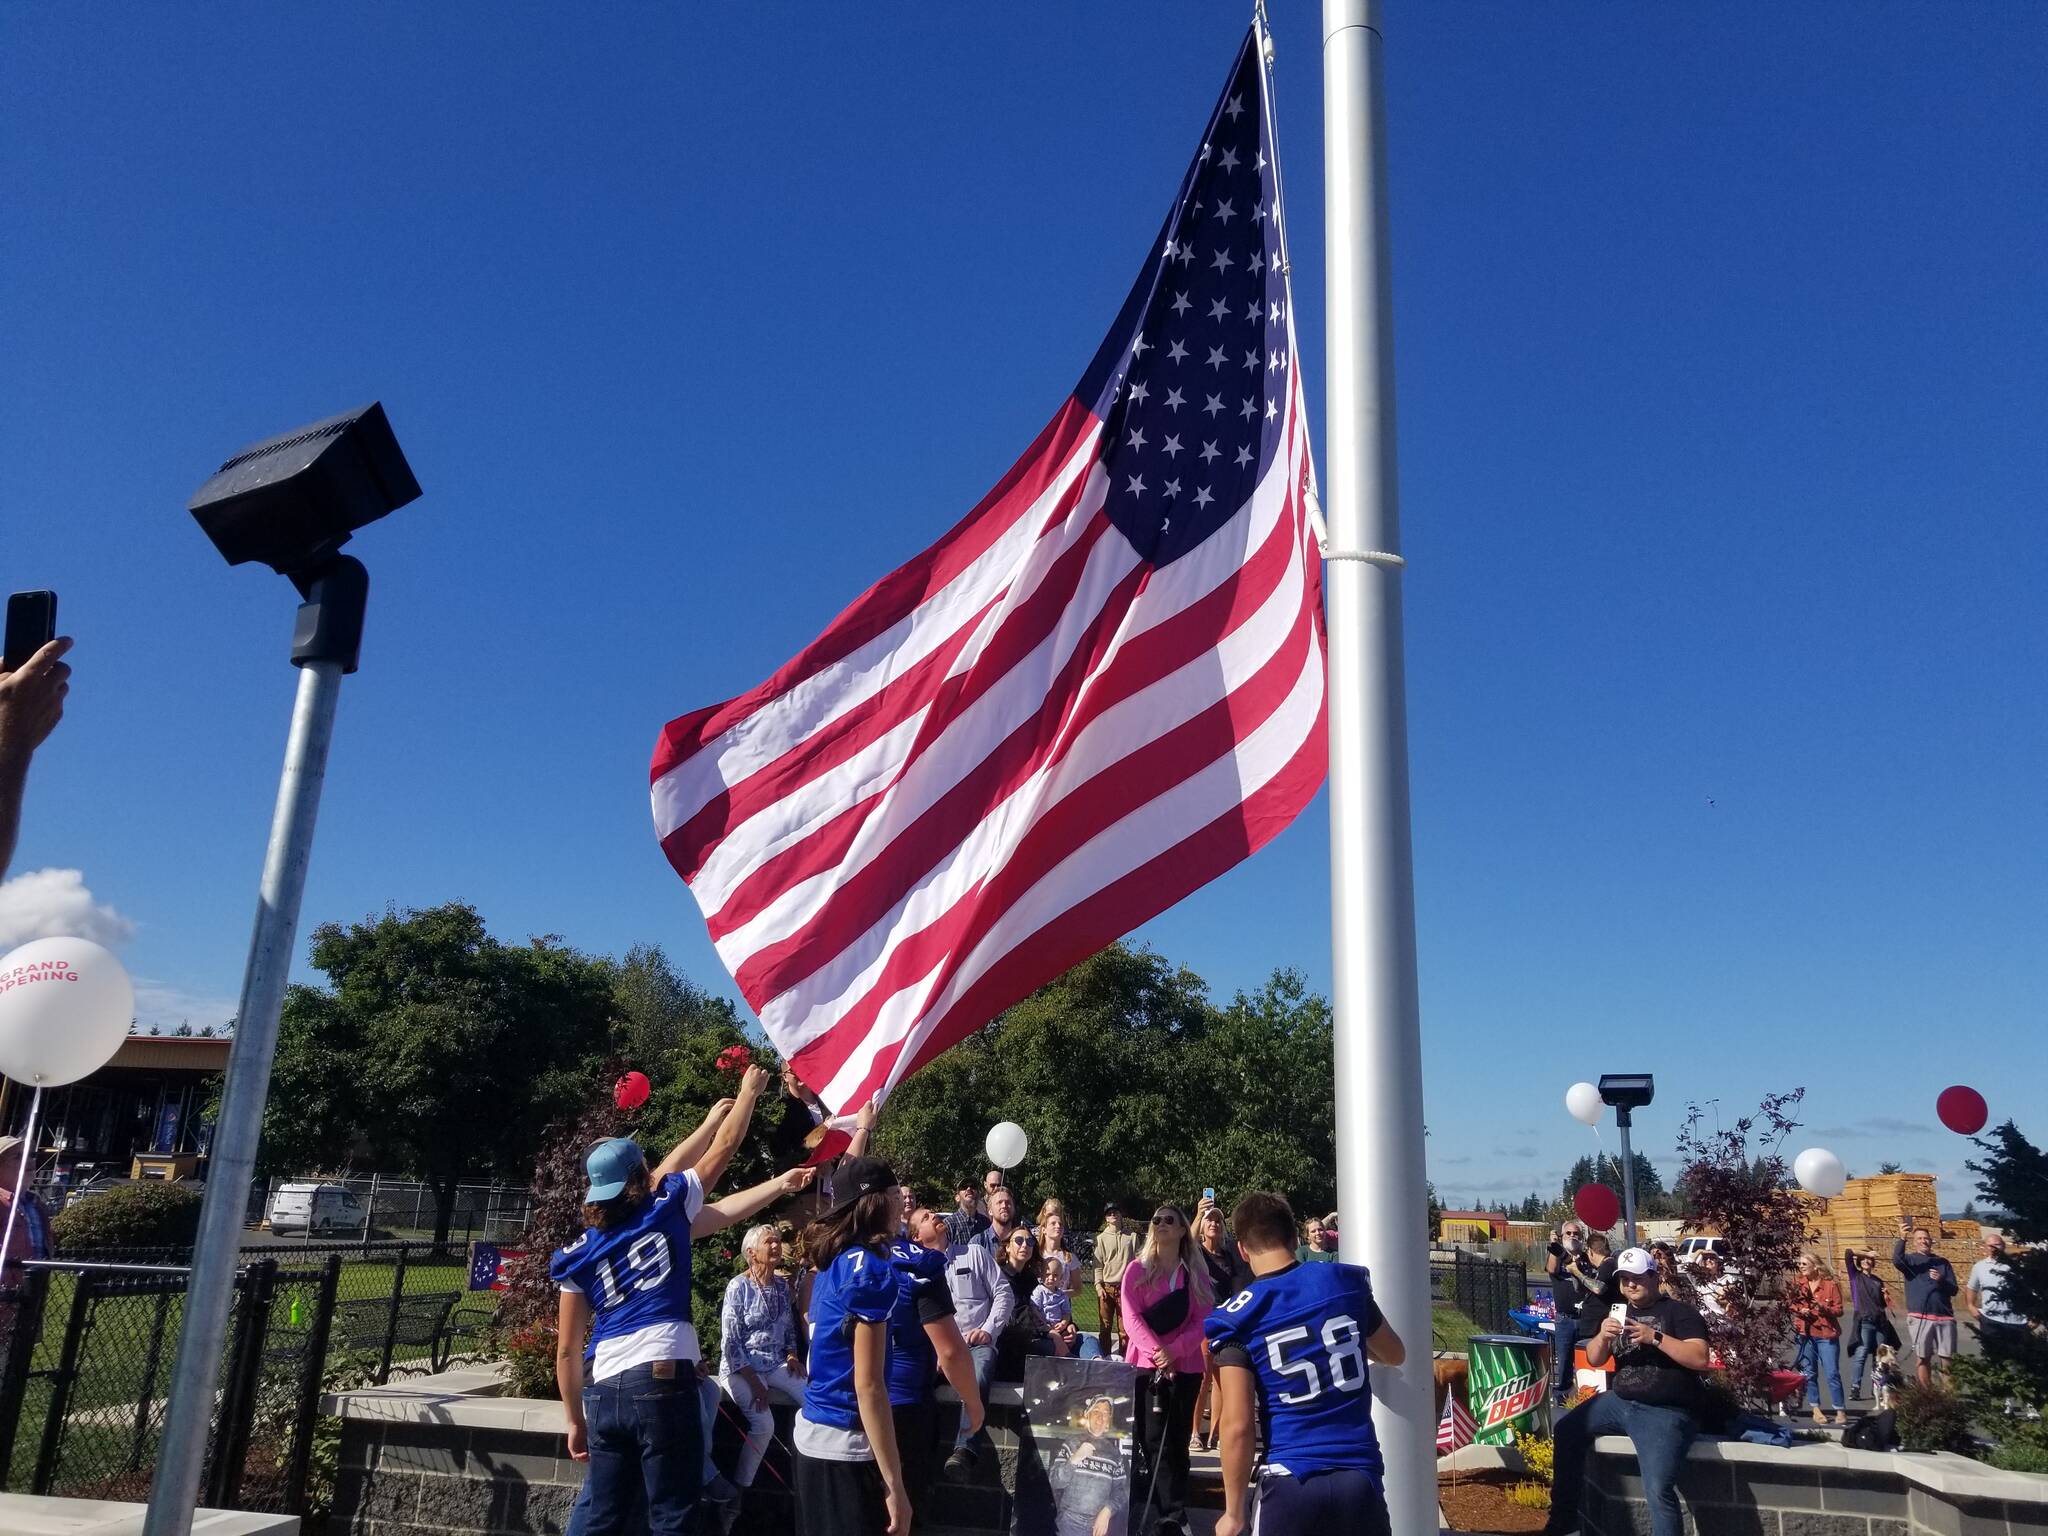 What originally started as a desire to install a flagpole slowly evolved into a flag pavilion with a dog park attachment. Elma High School football players were tasked with raising the ceremonial flag during the grand opening of the Martin Family Dog Park on Saturday, Sept. 24, in Elma. (Allen Leister | The Daily World)